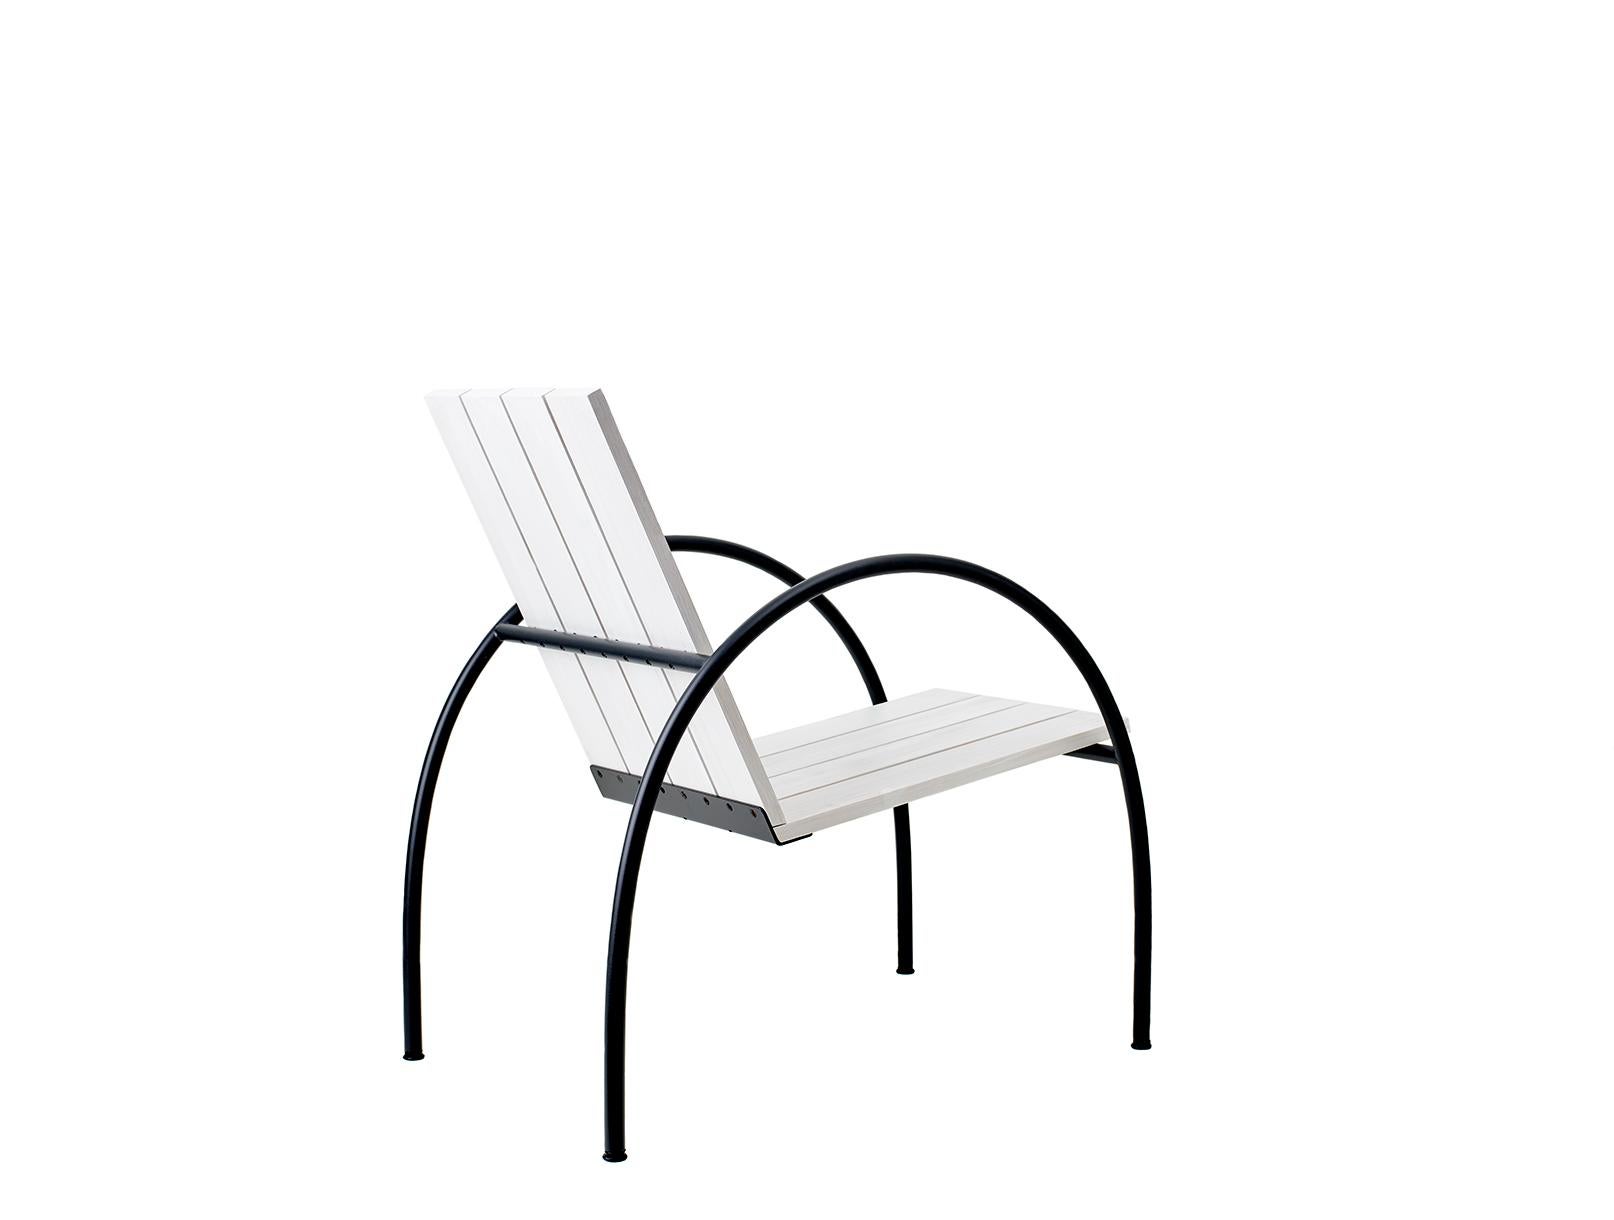 LIV arm chair is a part of the LIV collection designed by Jonas Bohlin in 1997.
The collection was named after his rowing boat LIV, the boat that he and his friends were rowing from Stockholm to Paris on open water, along rivers and canals for 116